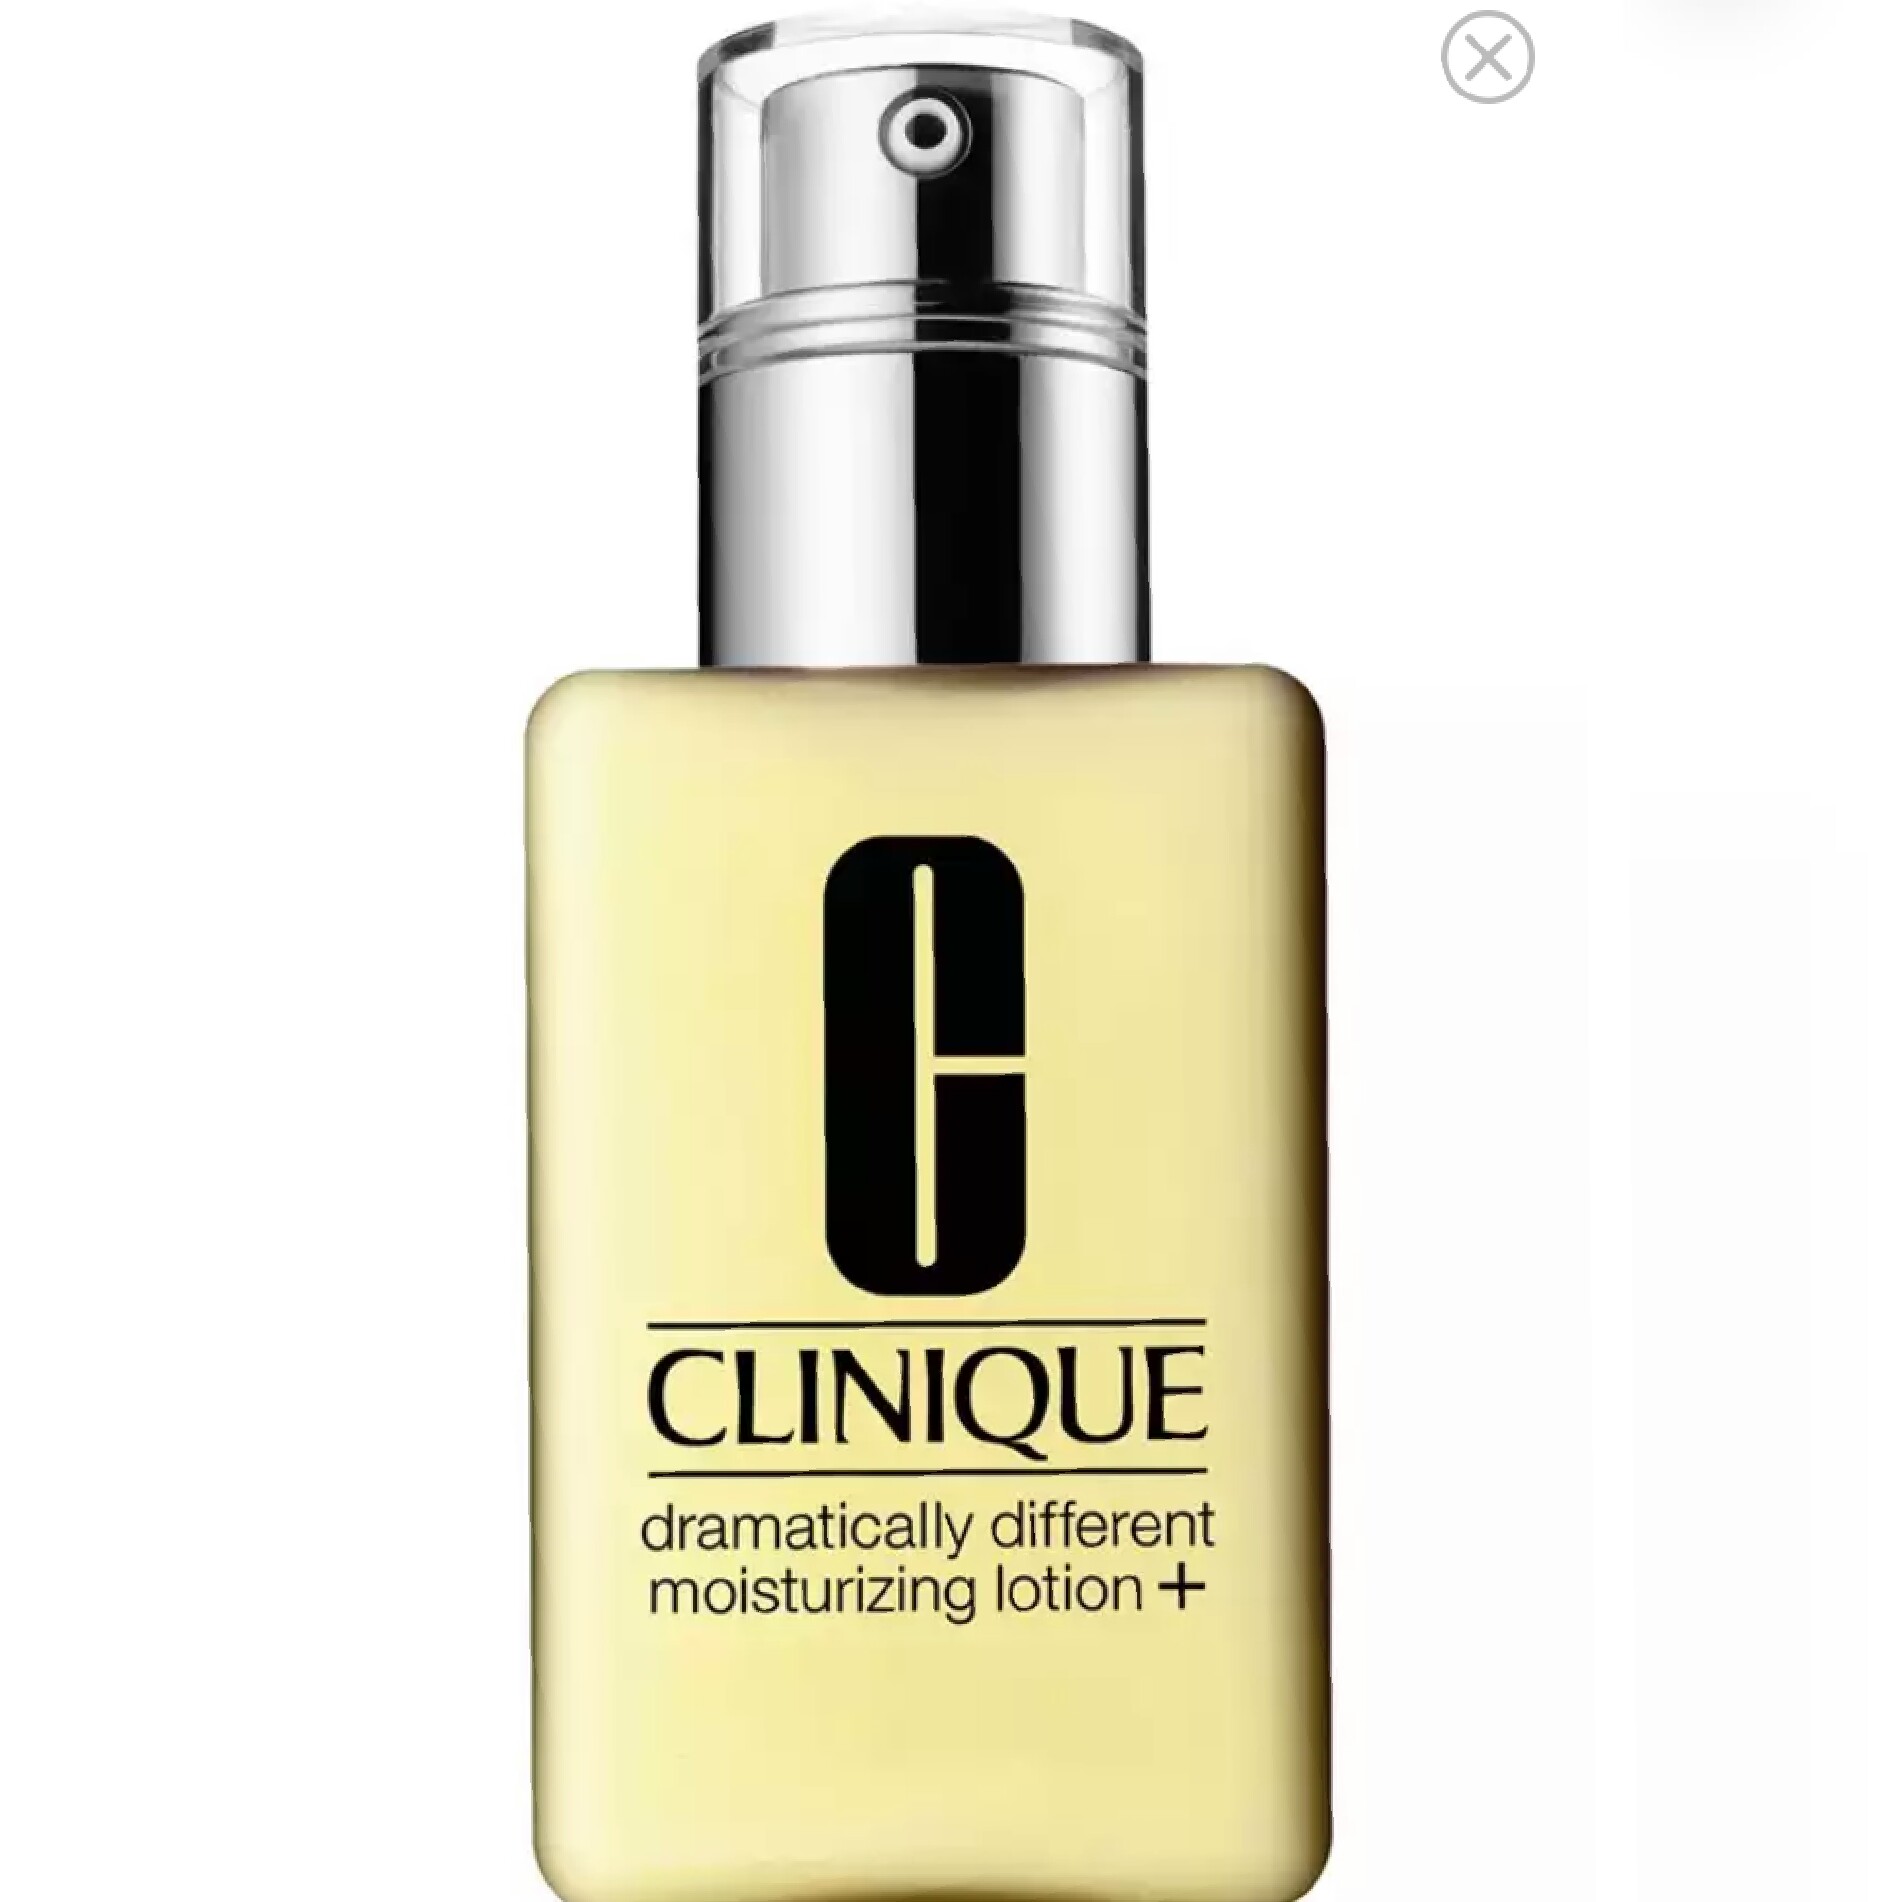 Clinique Dramatically Different Moisturising Lotion +